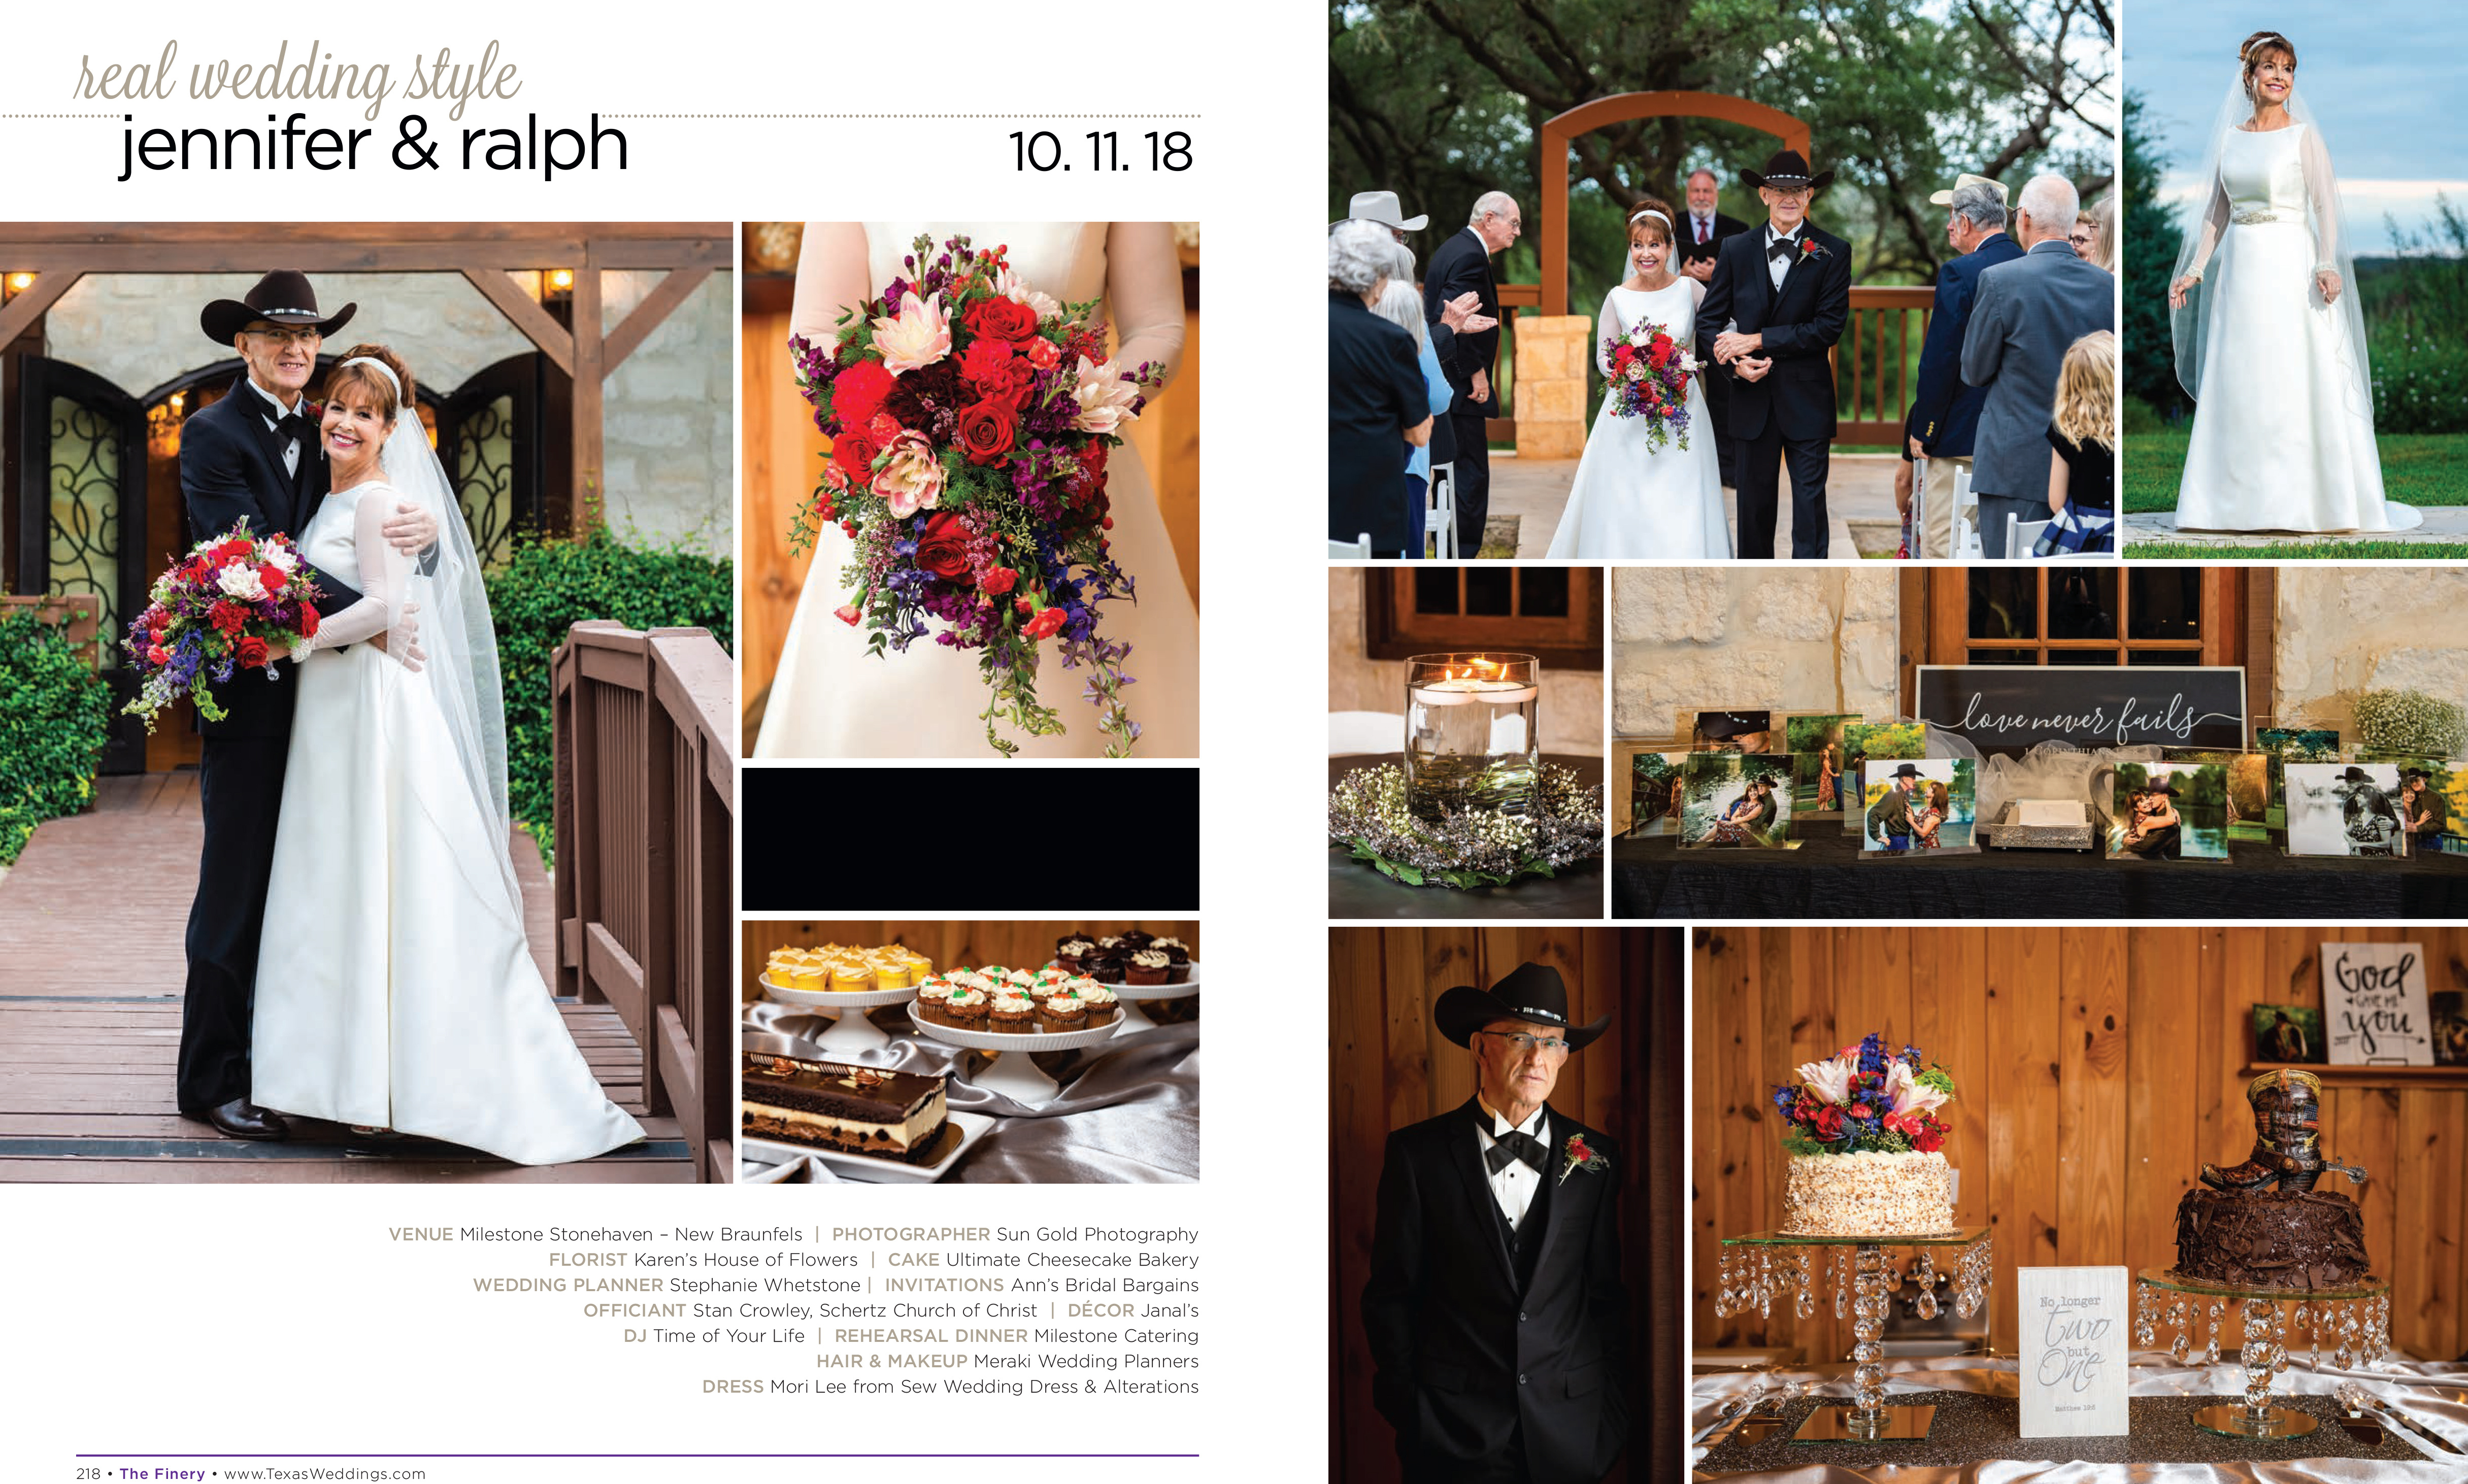 Jennifer & Ralph in their Real Wedding Page in the Spring/Summer 2019 Texas Wedding Guide